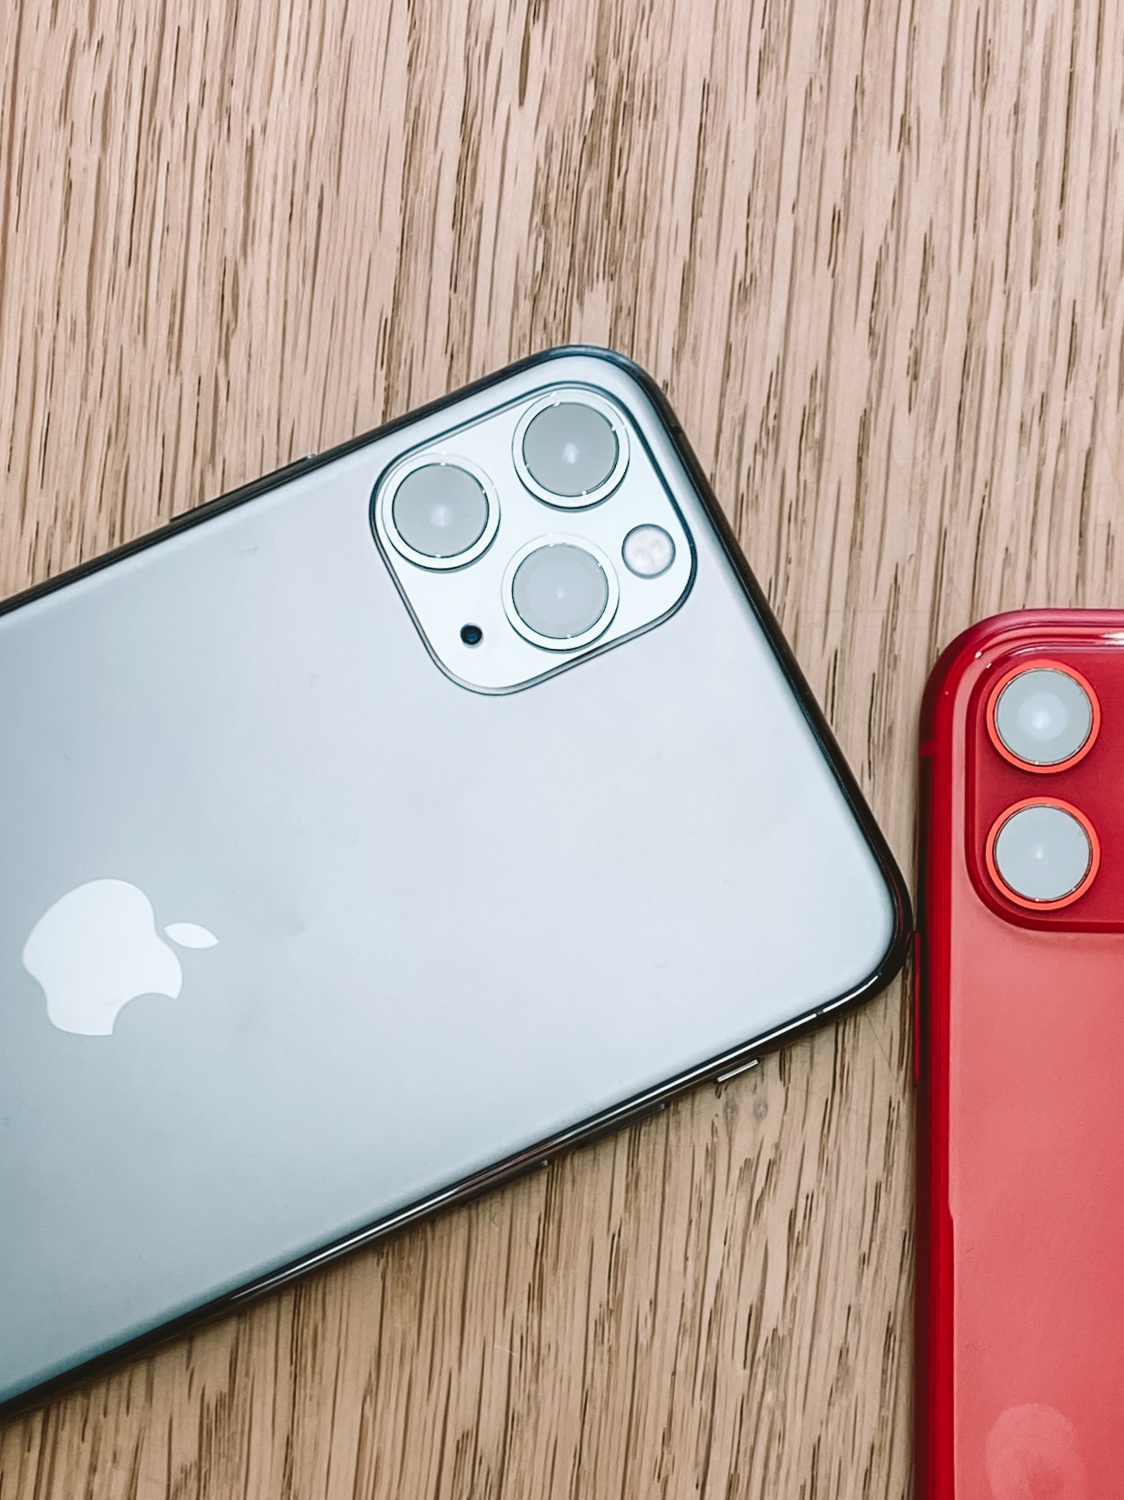 Two new features of the iPhone 11 and iOS 13 are annoying a lot of users, but here's a quick way to fix these problems.